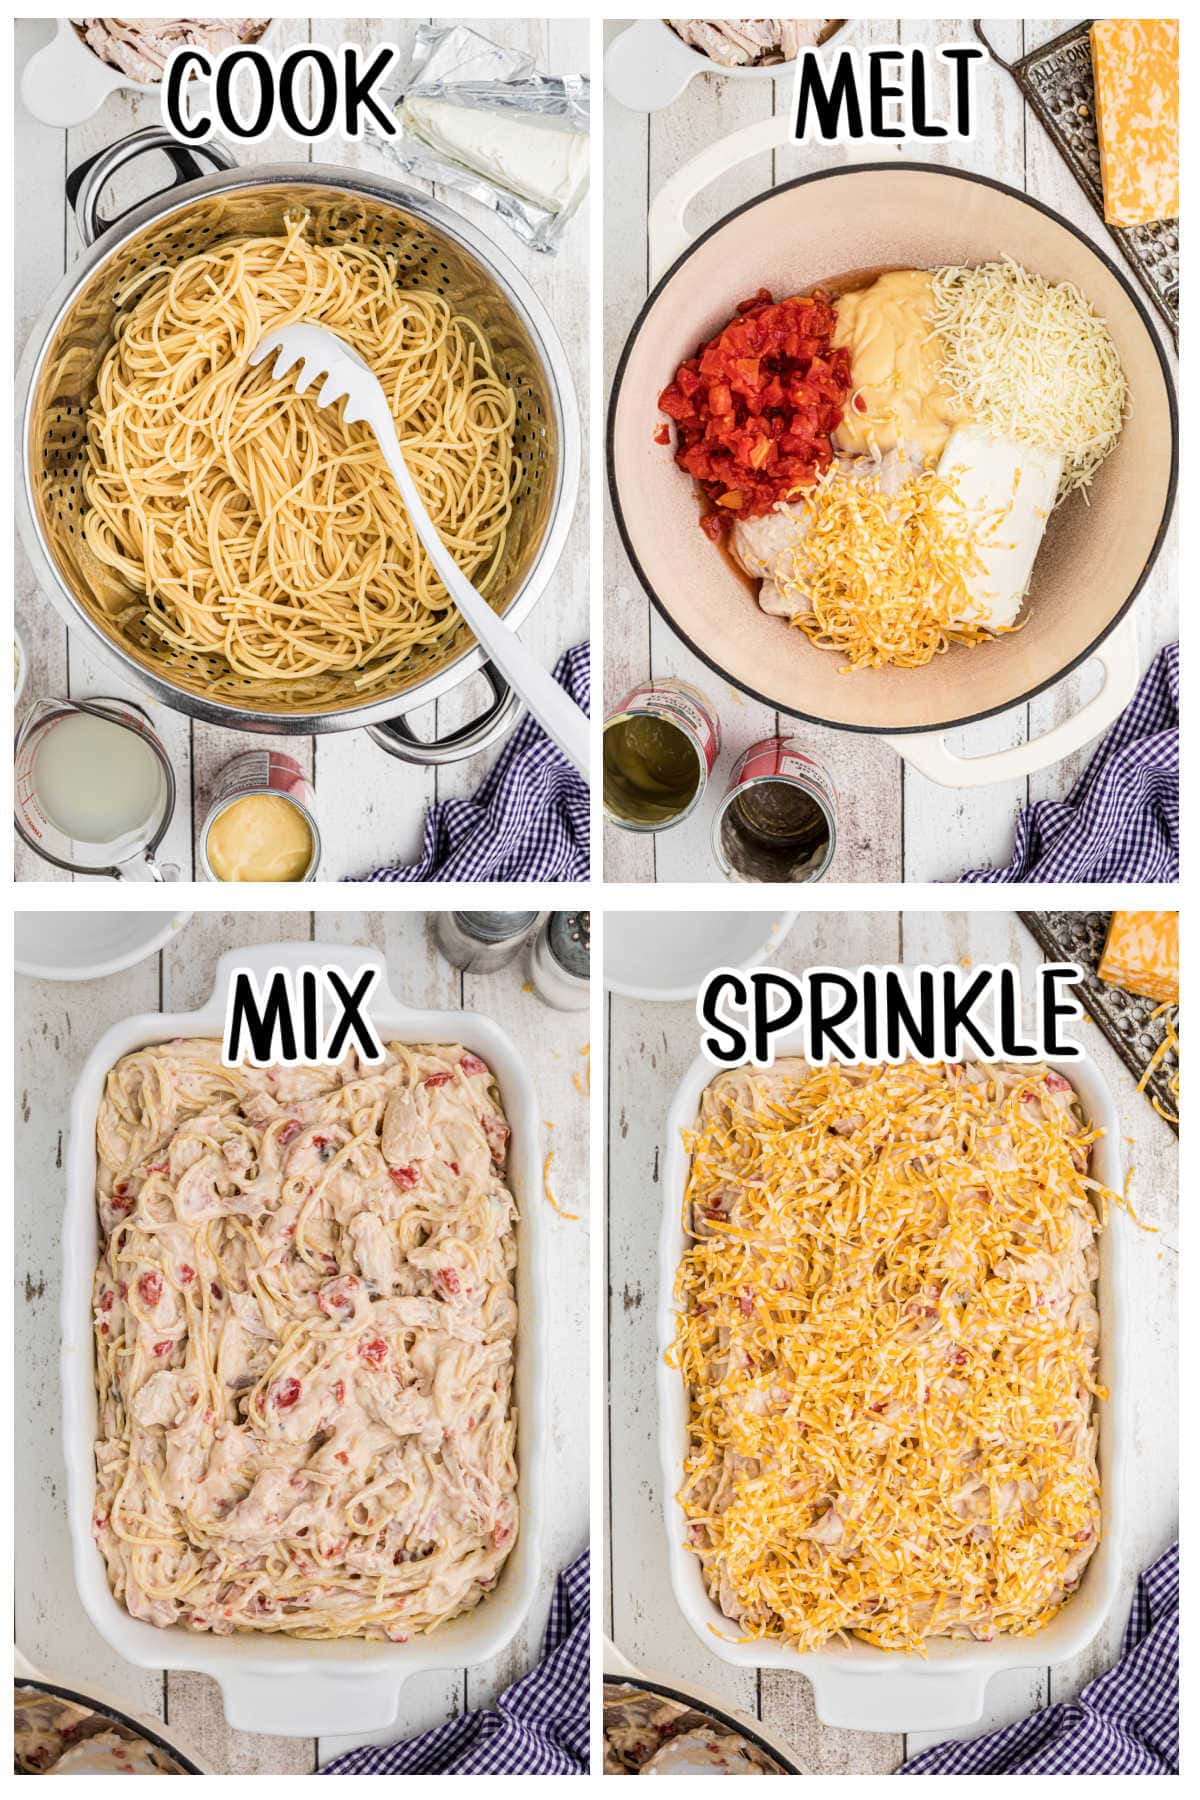 Step by step images showing how to make chicken spaghetti.